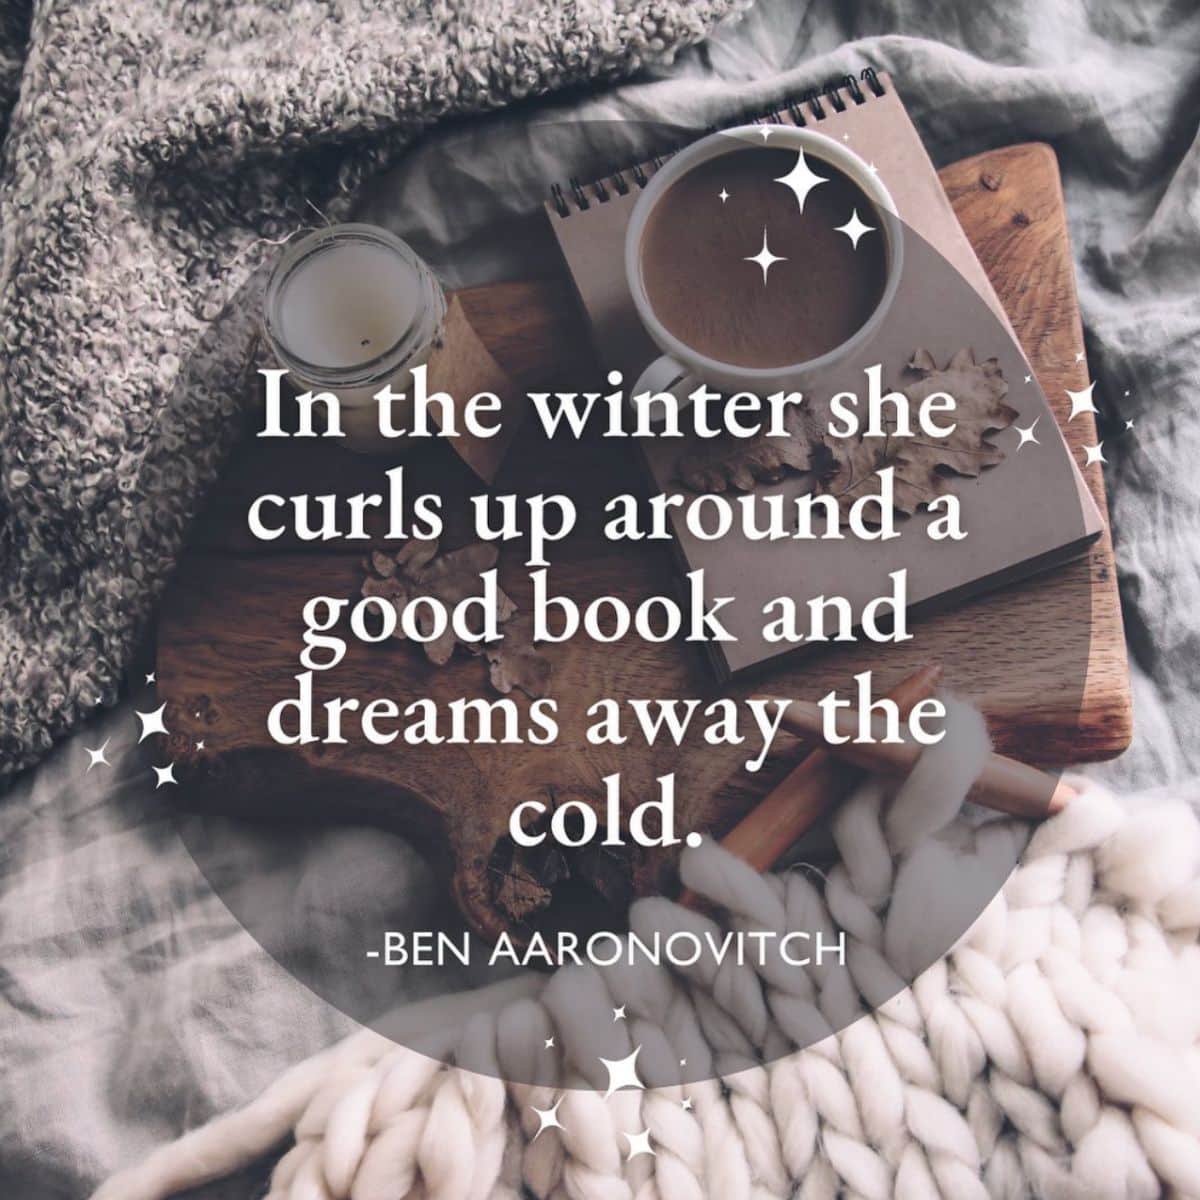 In the winter she curls up around a good book and dreams away the cold. -ben aaronovitch.